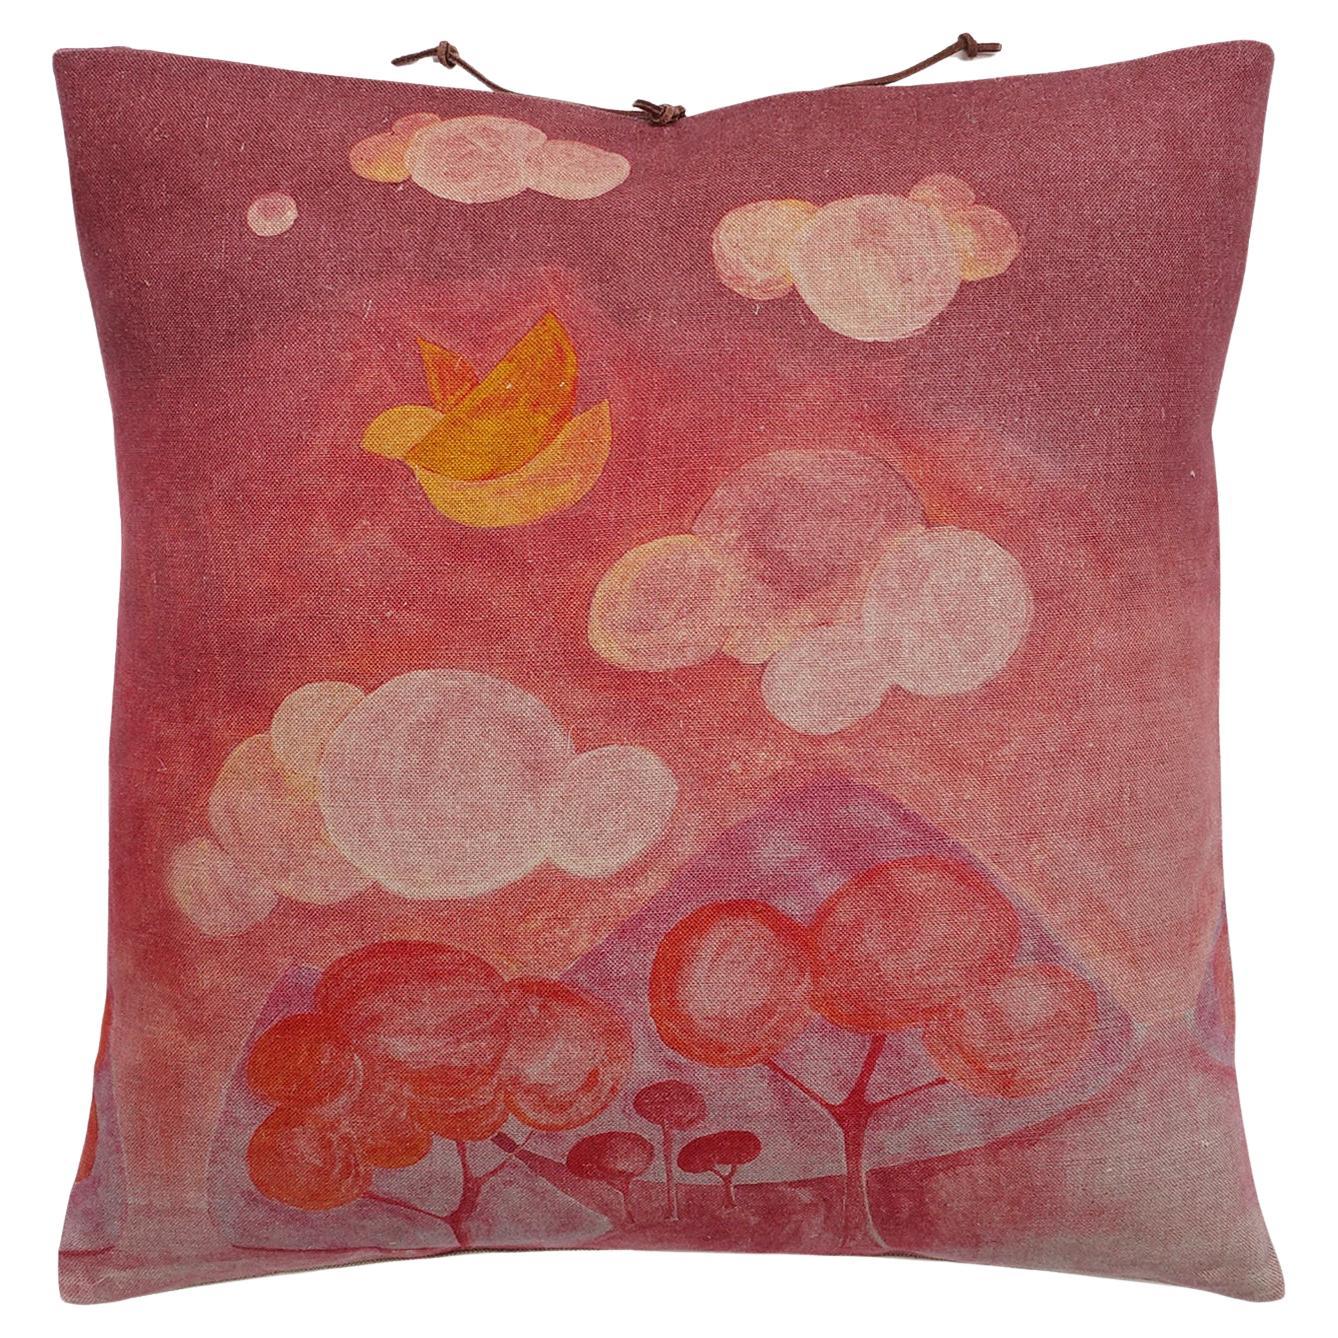 Printed Linen Pillow Happy Place Rose For Sale